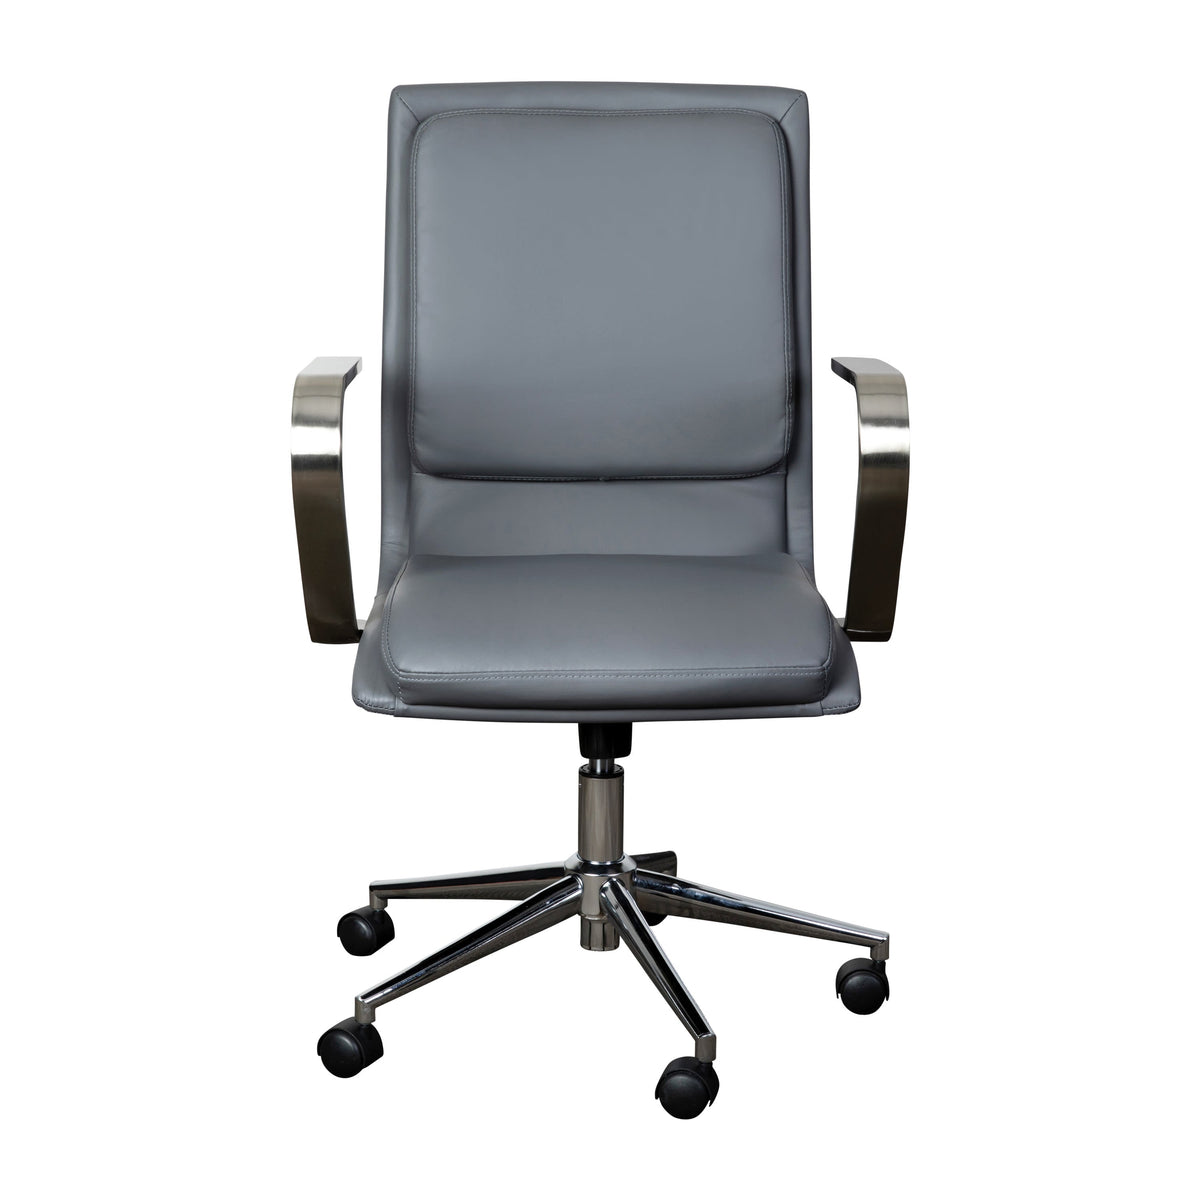 Gray LeatherSoft/Chrome Frame |#| Designer Executive Swivel Office Chair with Brushed Chrome Arms and Base, Gray